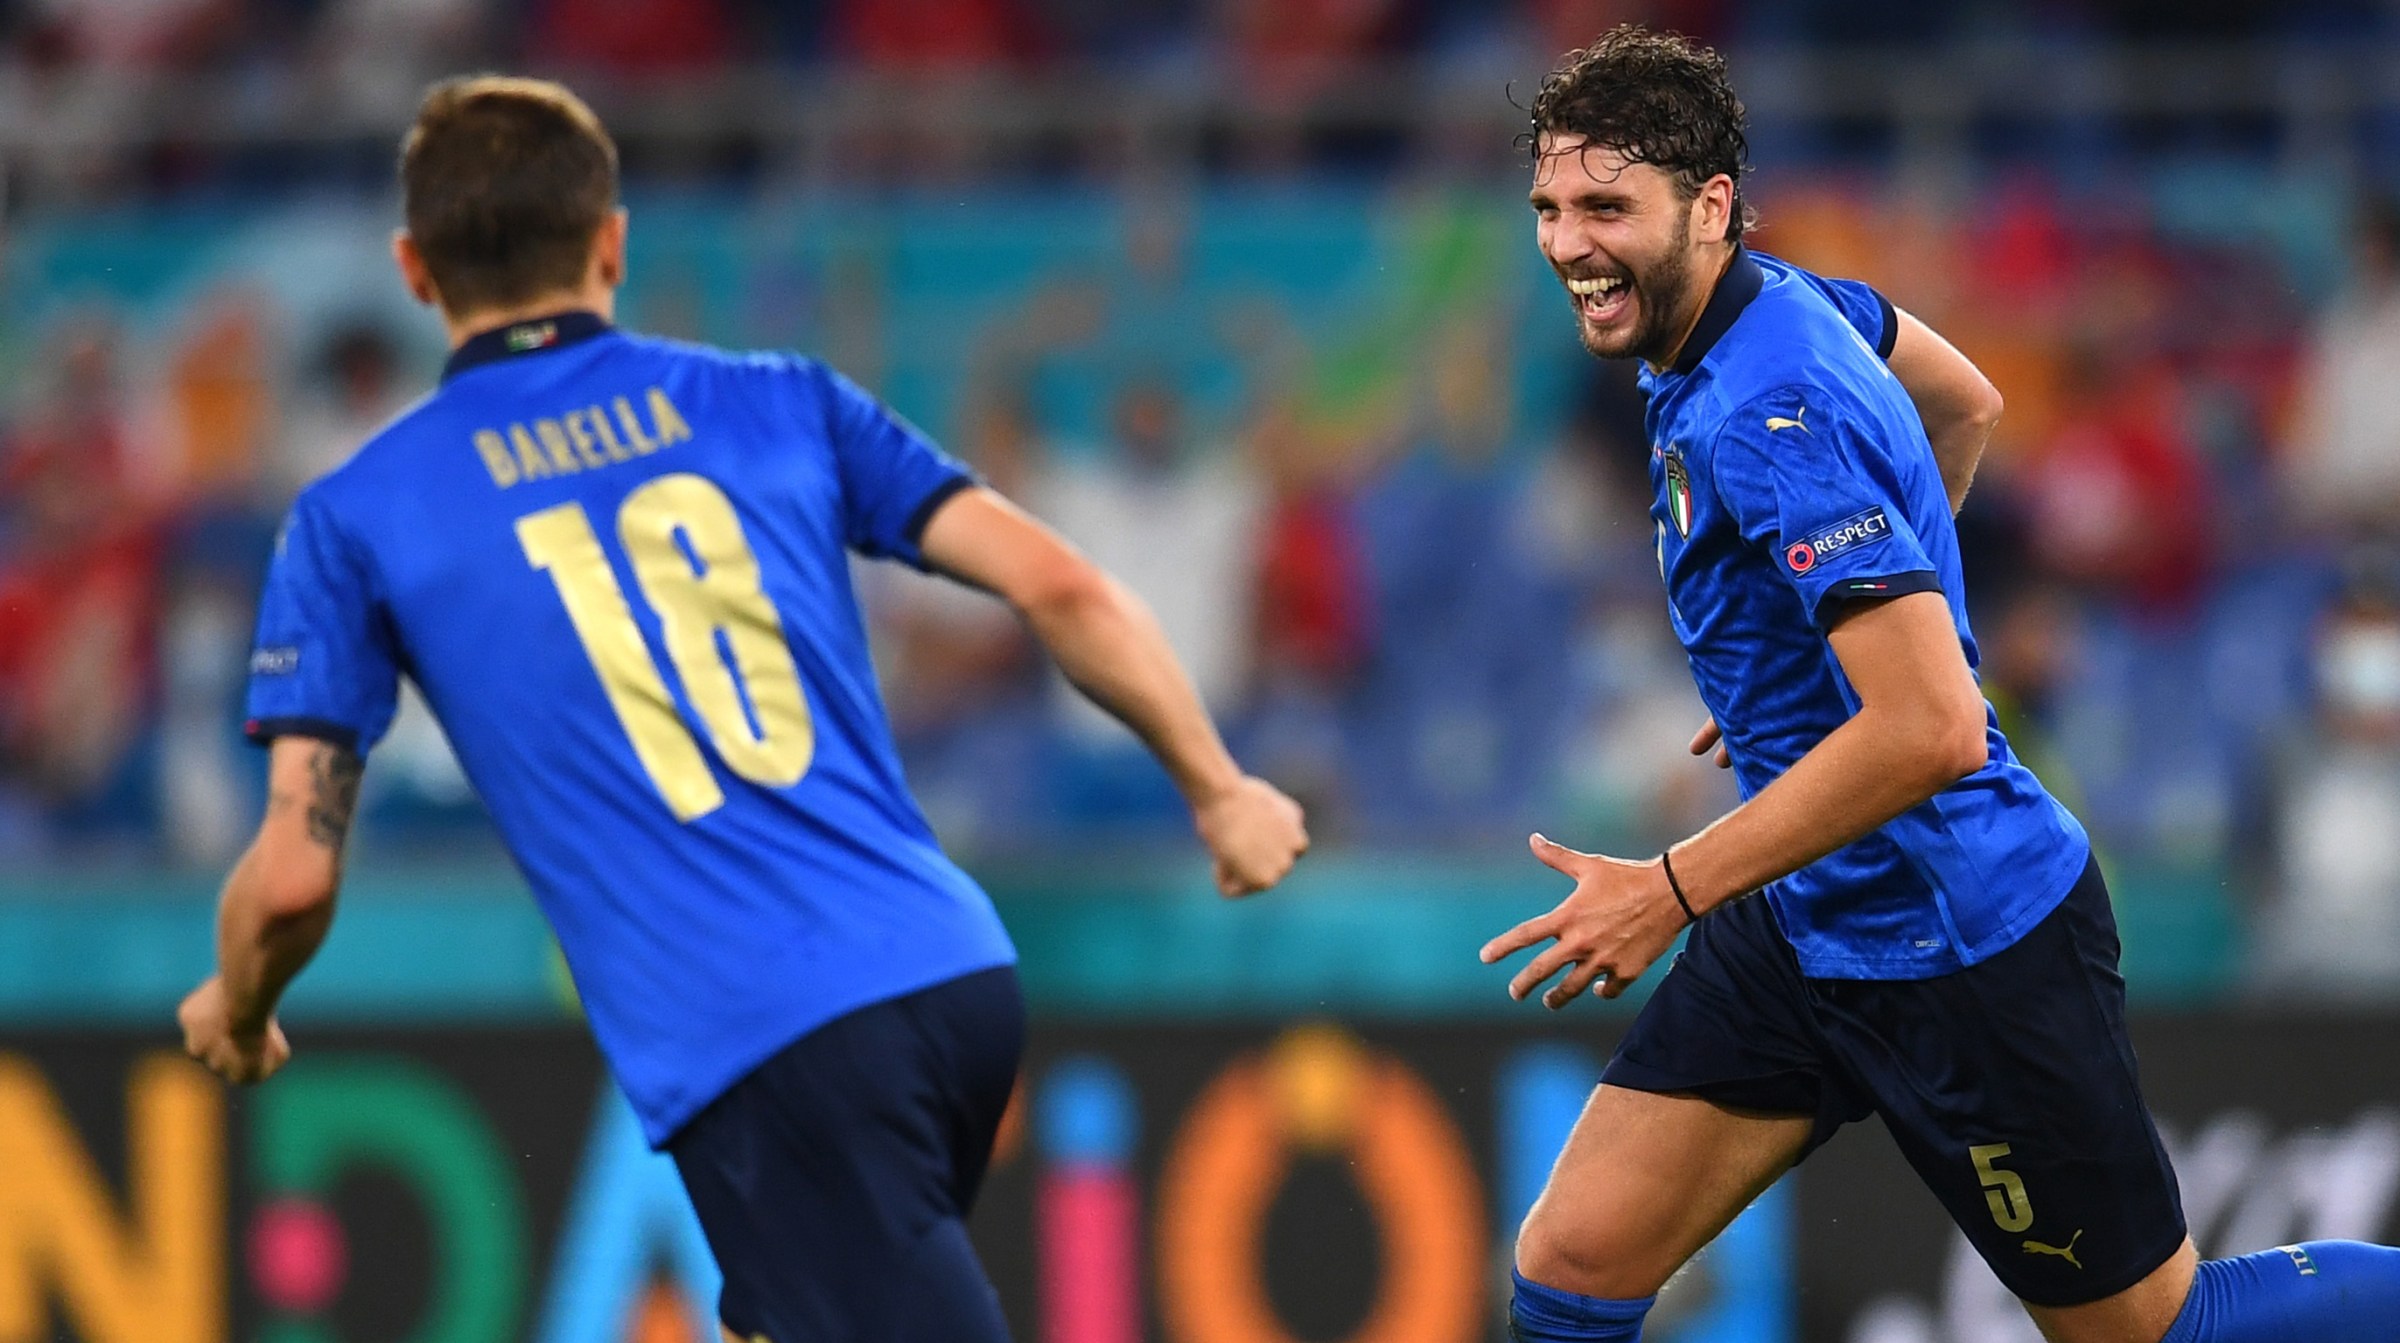 Manuel Locatelli of Italy celebrates with Nicolo Barella after scoring their side's first goal during the UEFA Euro 2020 Championship Group A match between Italy and Switzerland at Olimpico Stadium on June 16, 2021 in Rome, Italy.